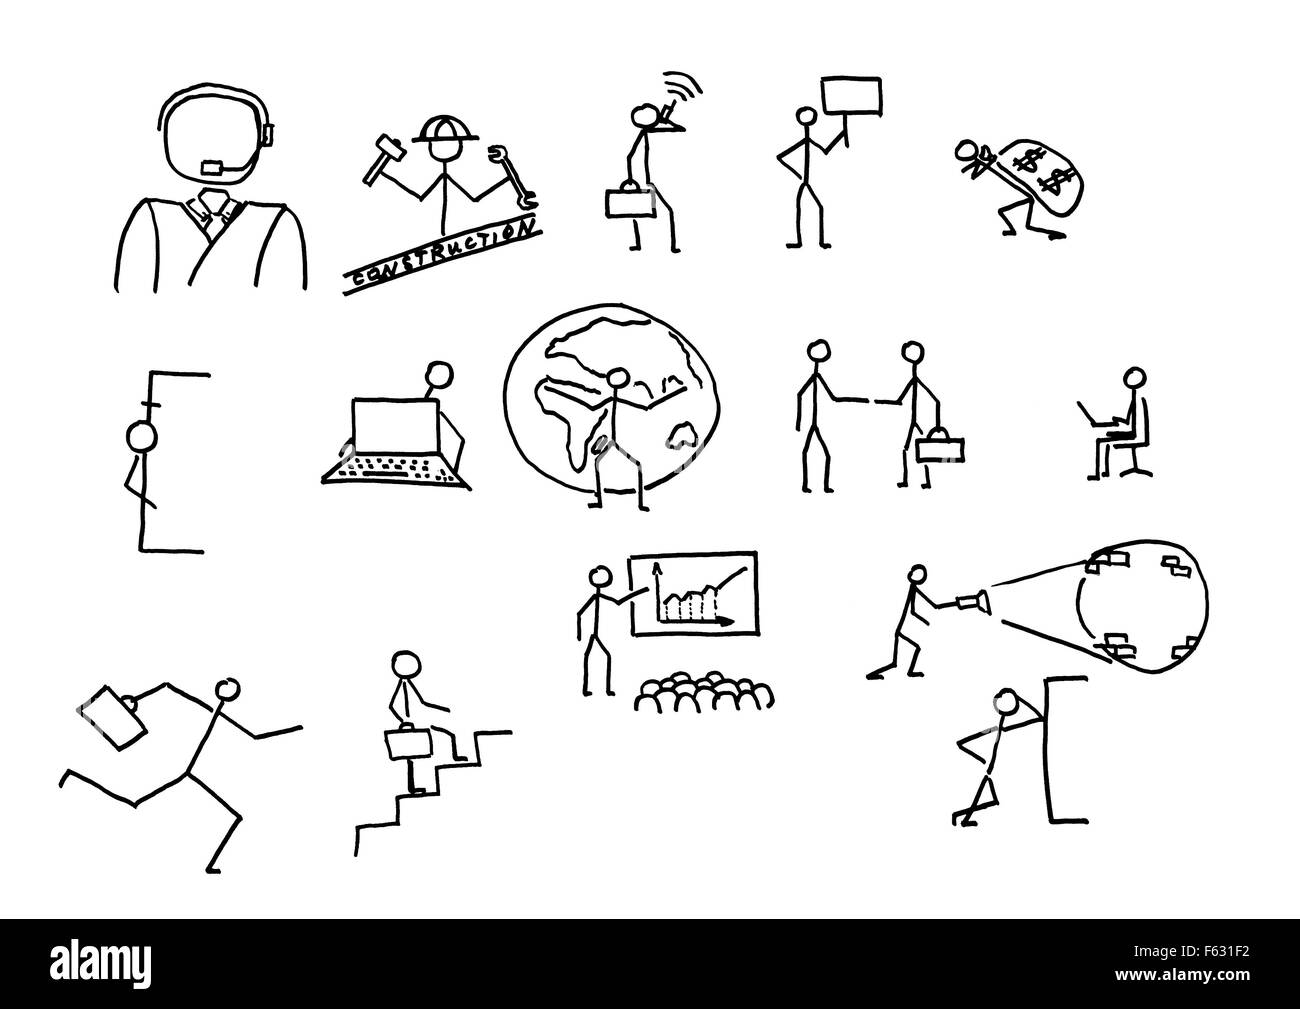 Business people sketches. In B/W Stock Photo